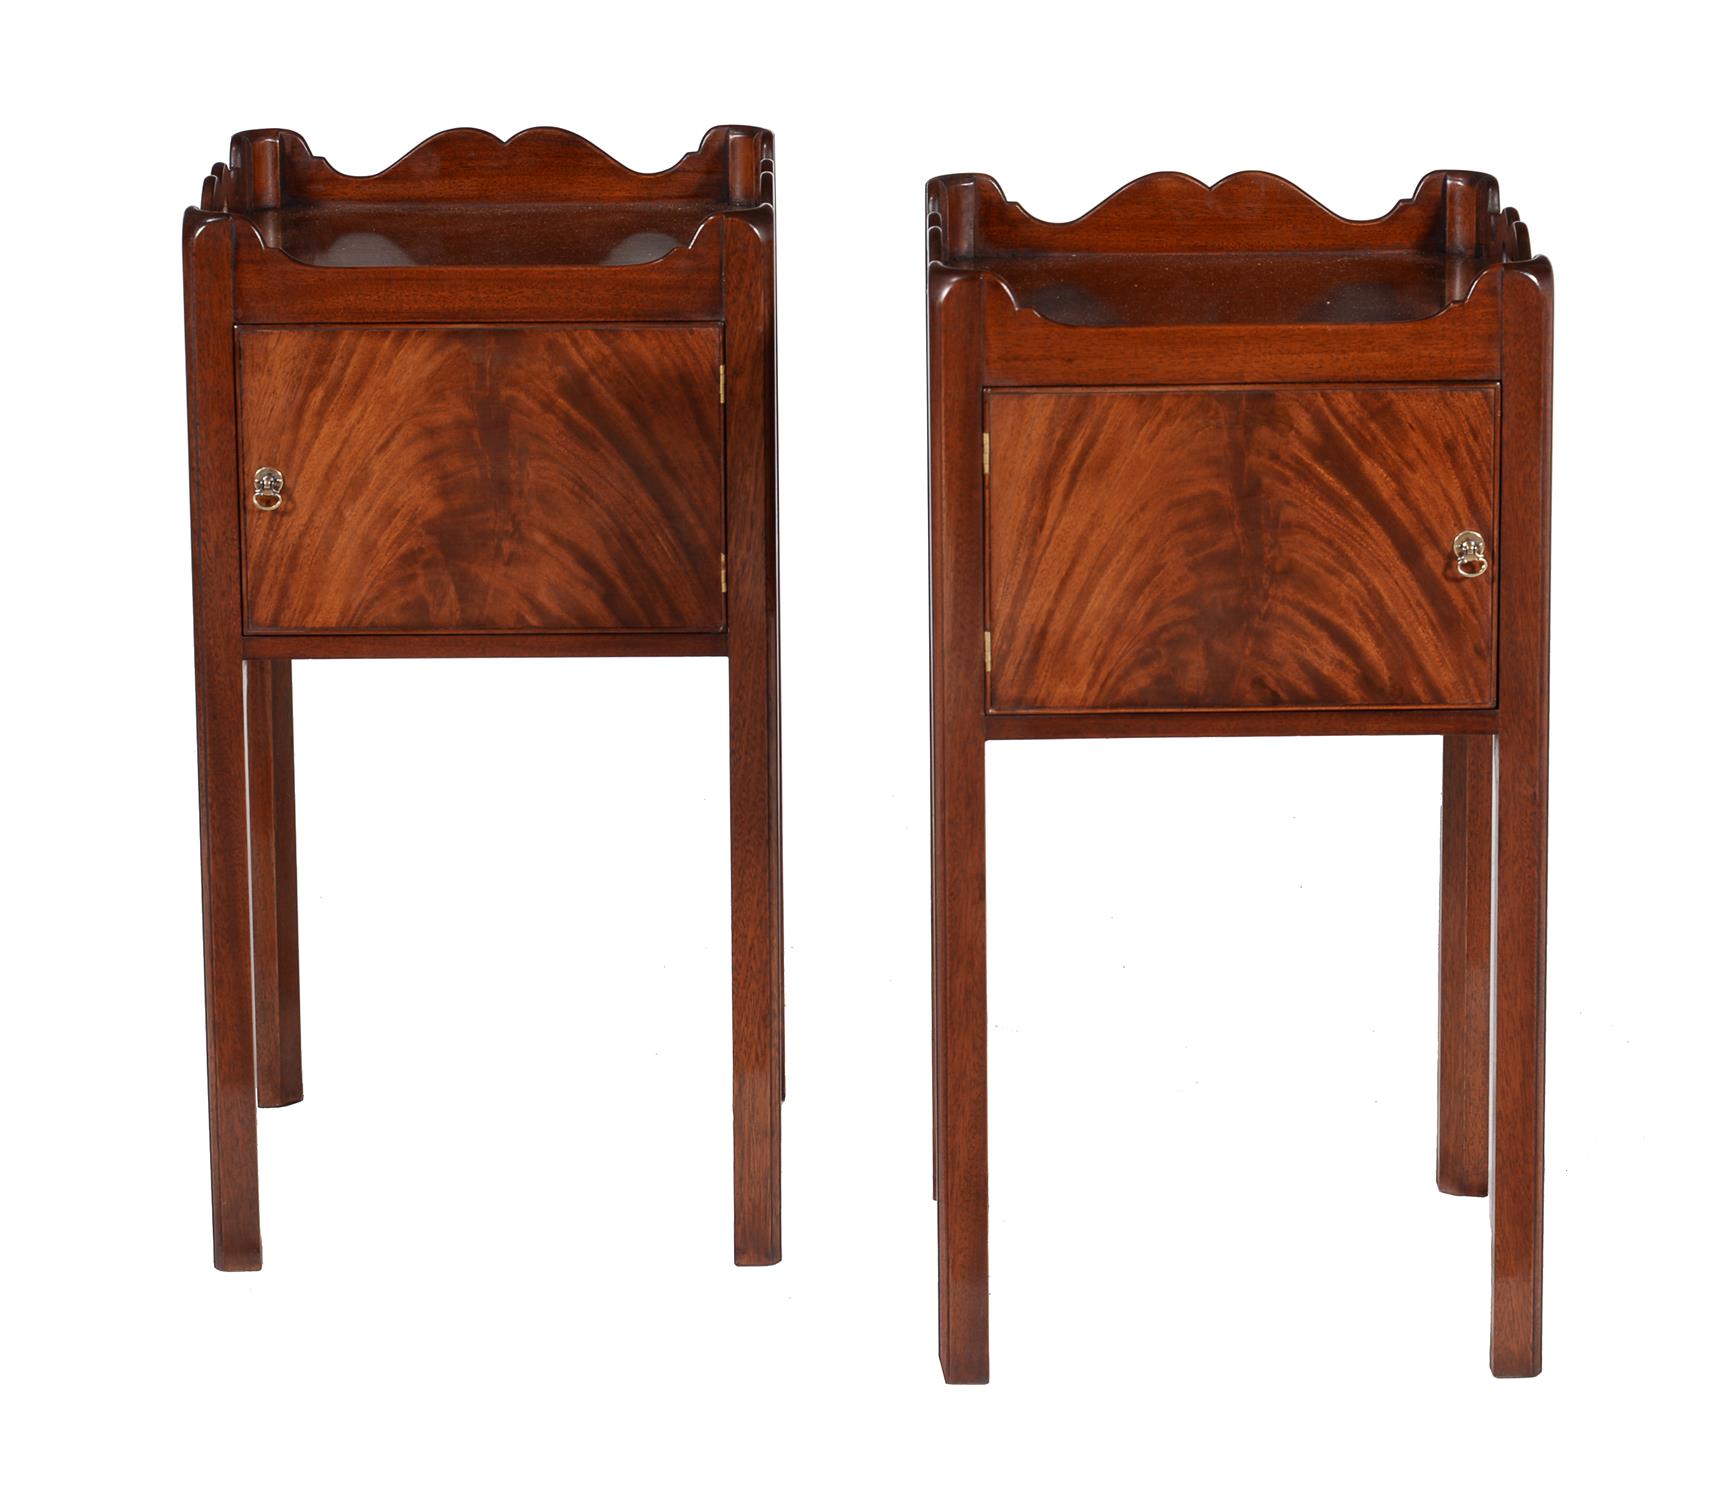 A pair of bedside cupboards in George III style